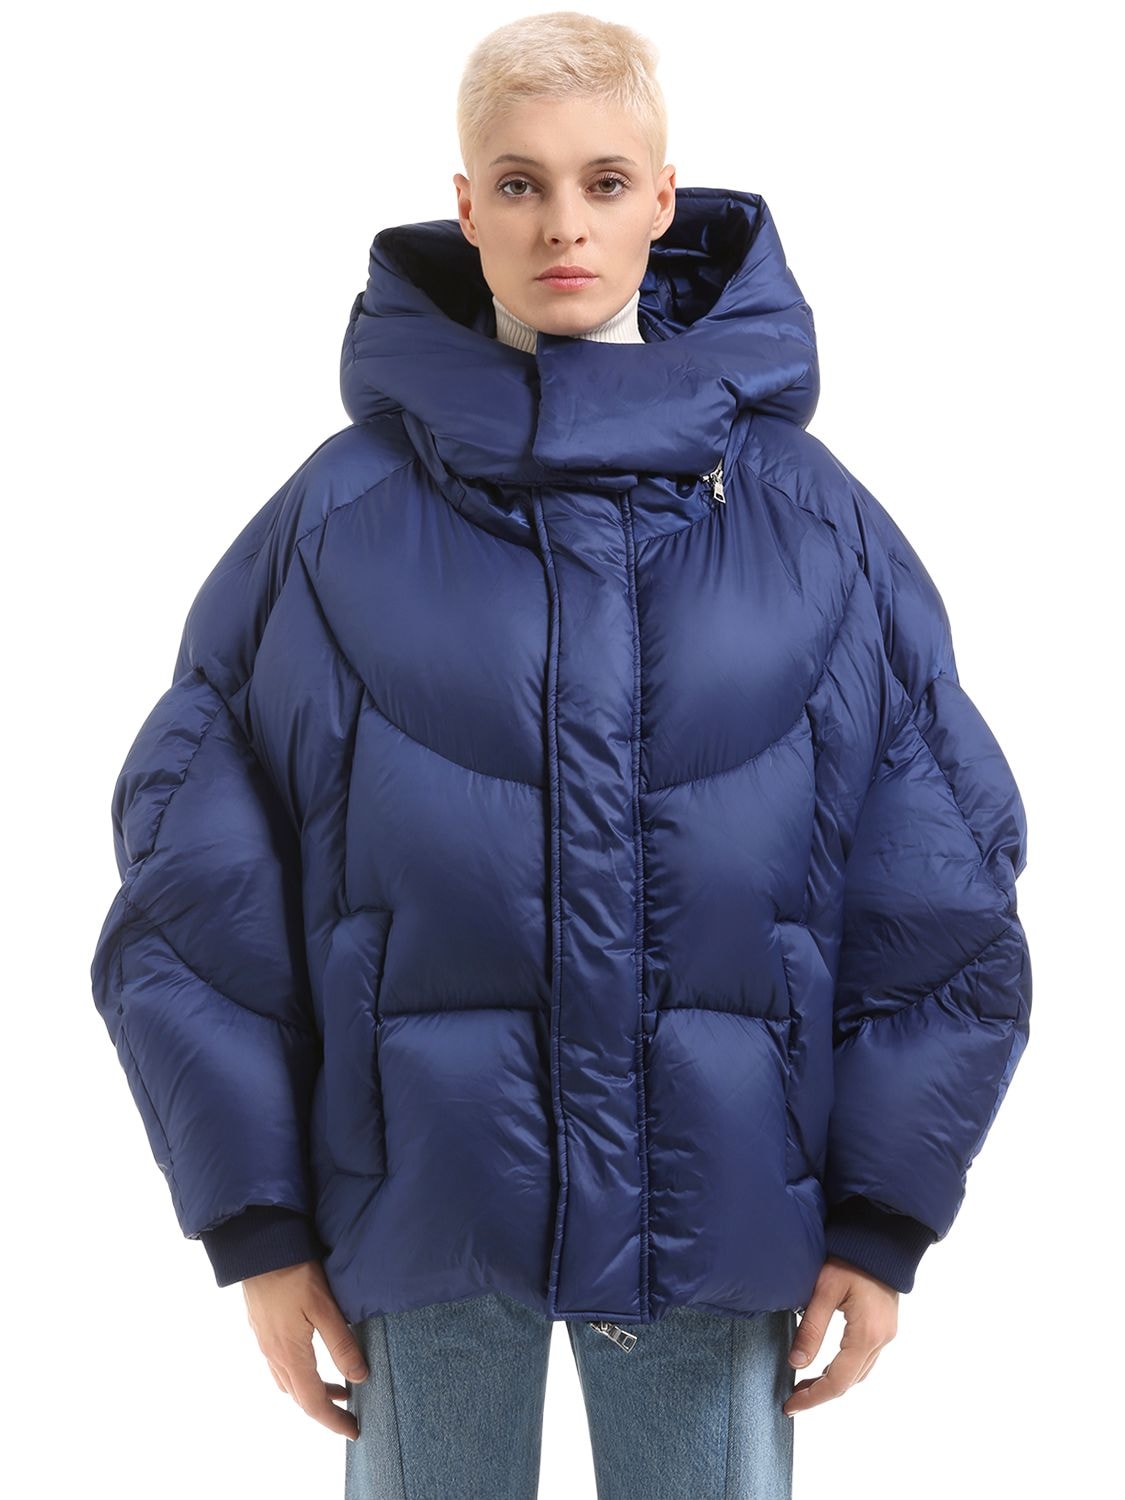 Chen Peng Oversized Hooded Puffer Down Jacket In Navy